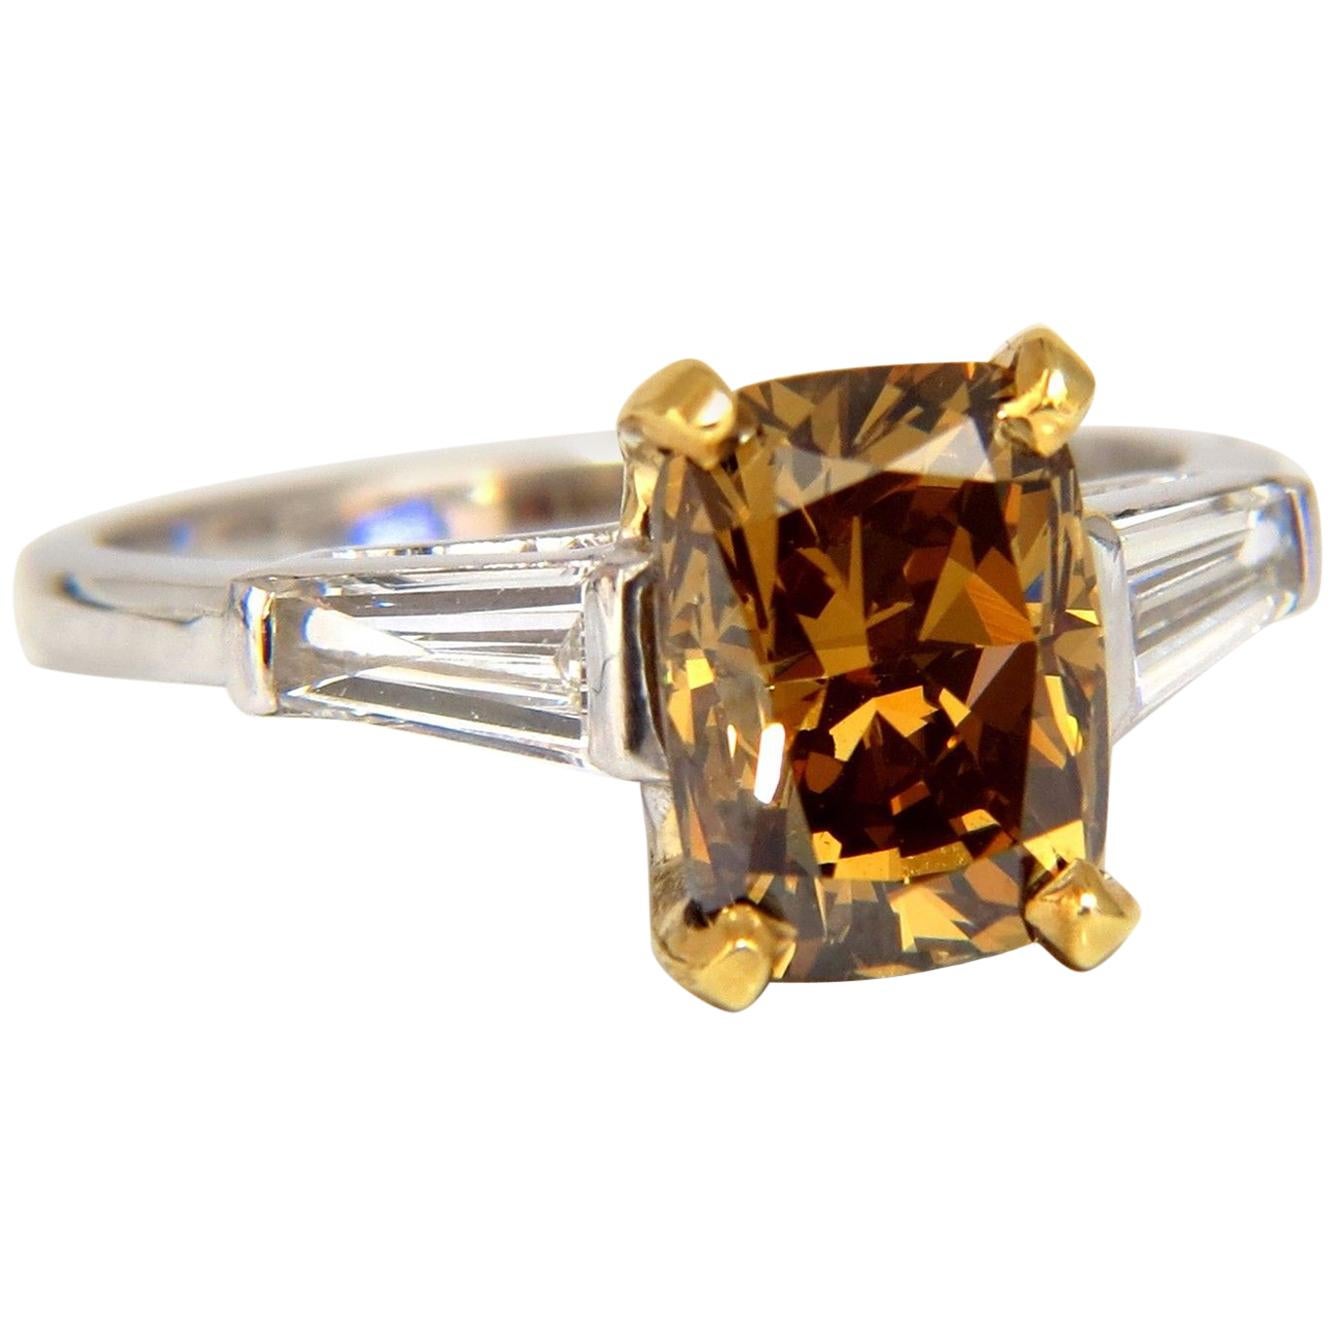 GIA Certified 2.59 Carat Fancy Yellow Brown Diamond Ring Platinum For Sale